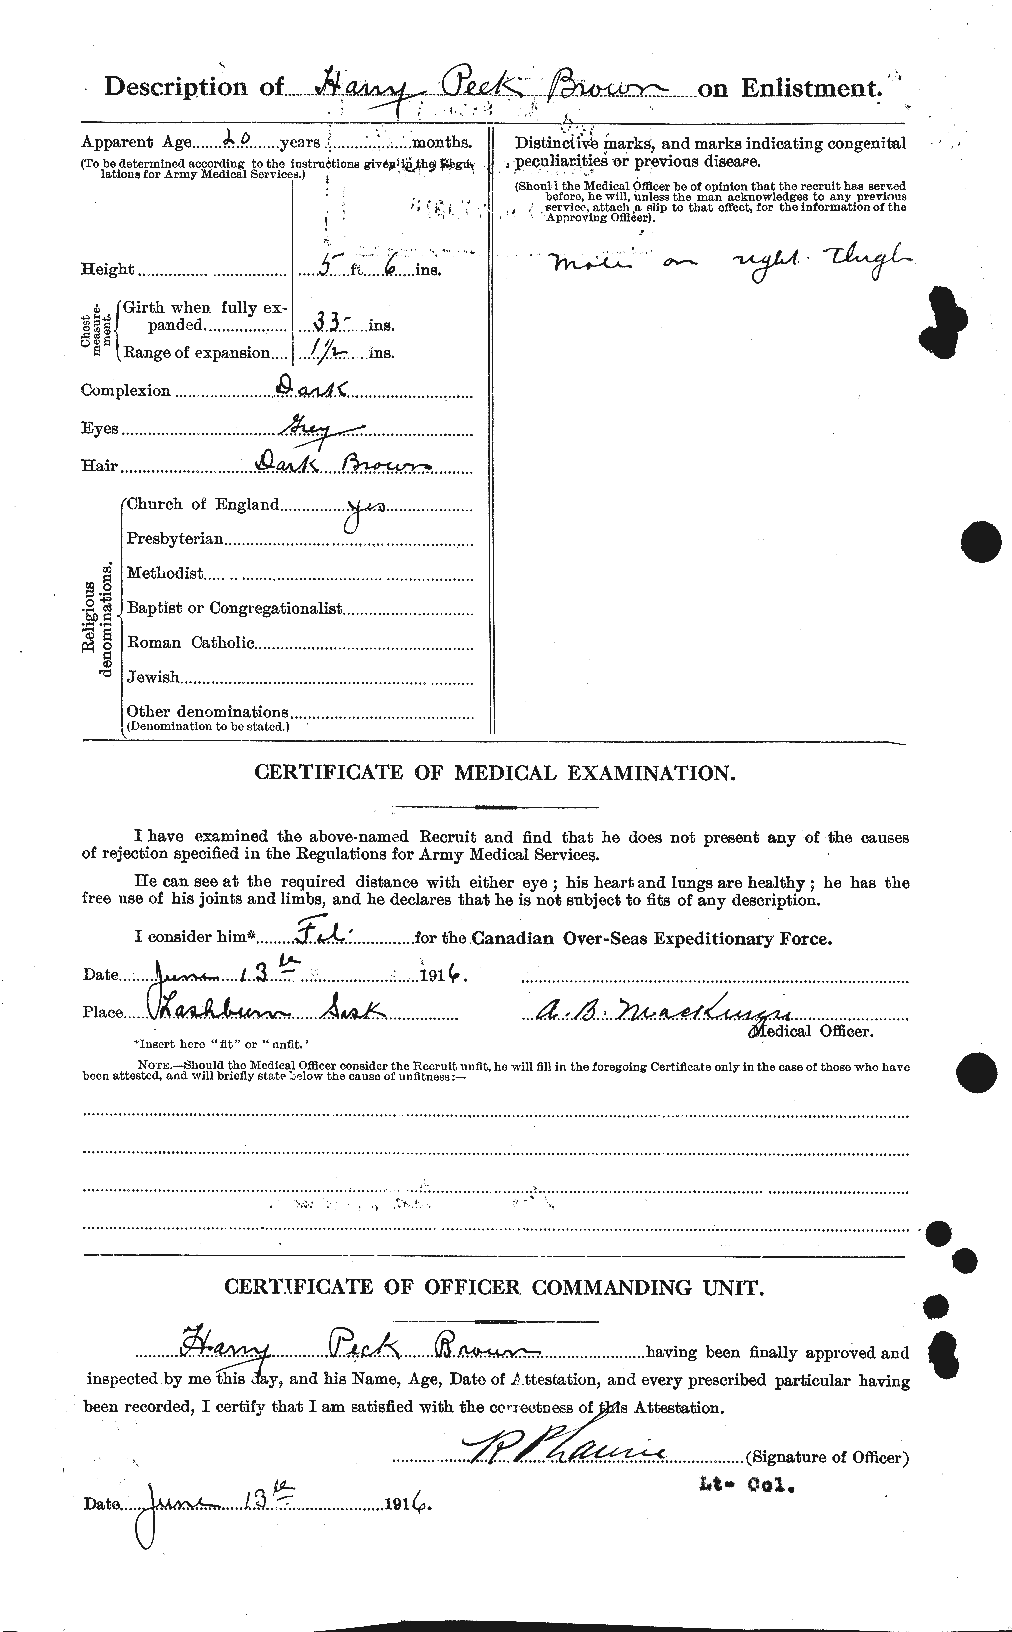 Personnel Records of the First World War - CEF 265465b